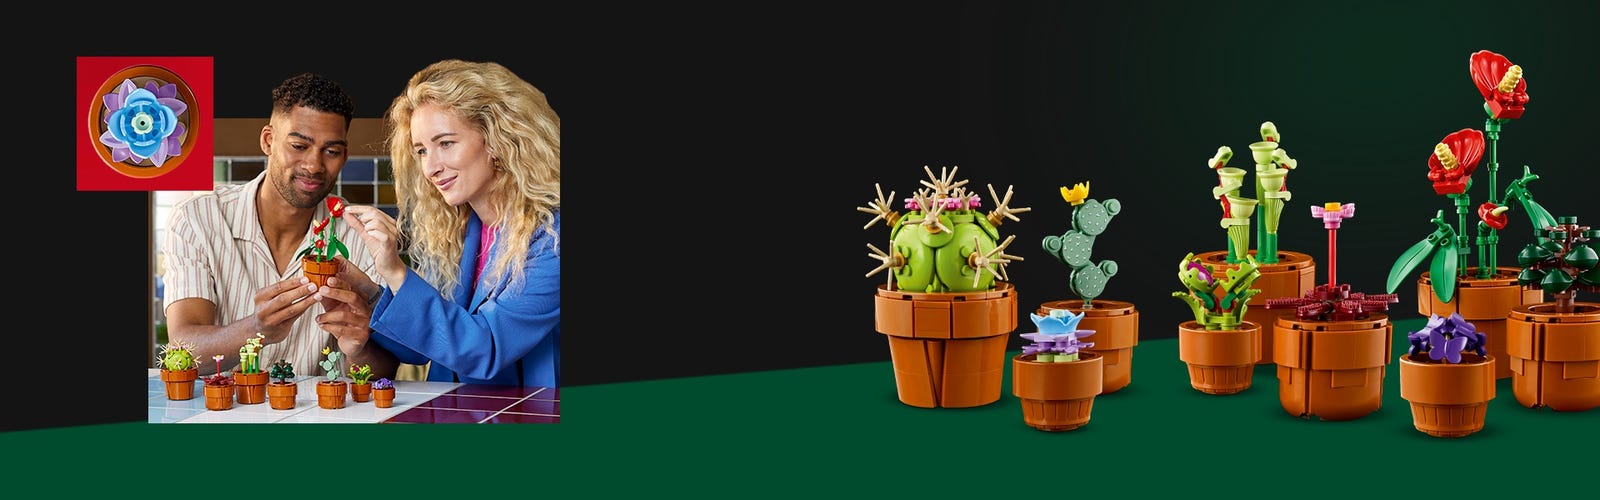 LEGO'S Tiny Plants Set Has Cacti and Jade Plants for $49.99